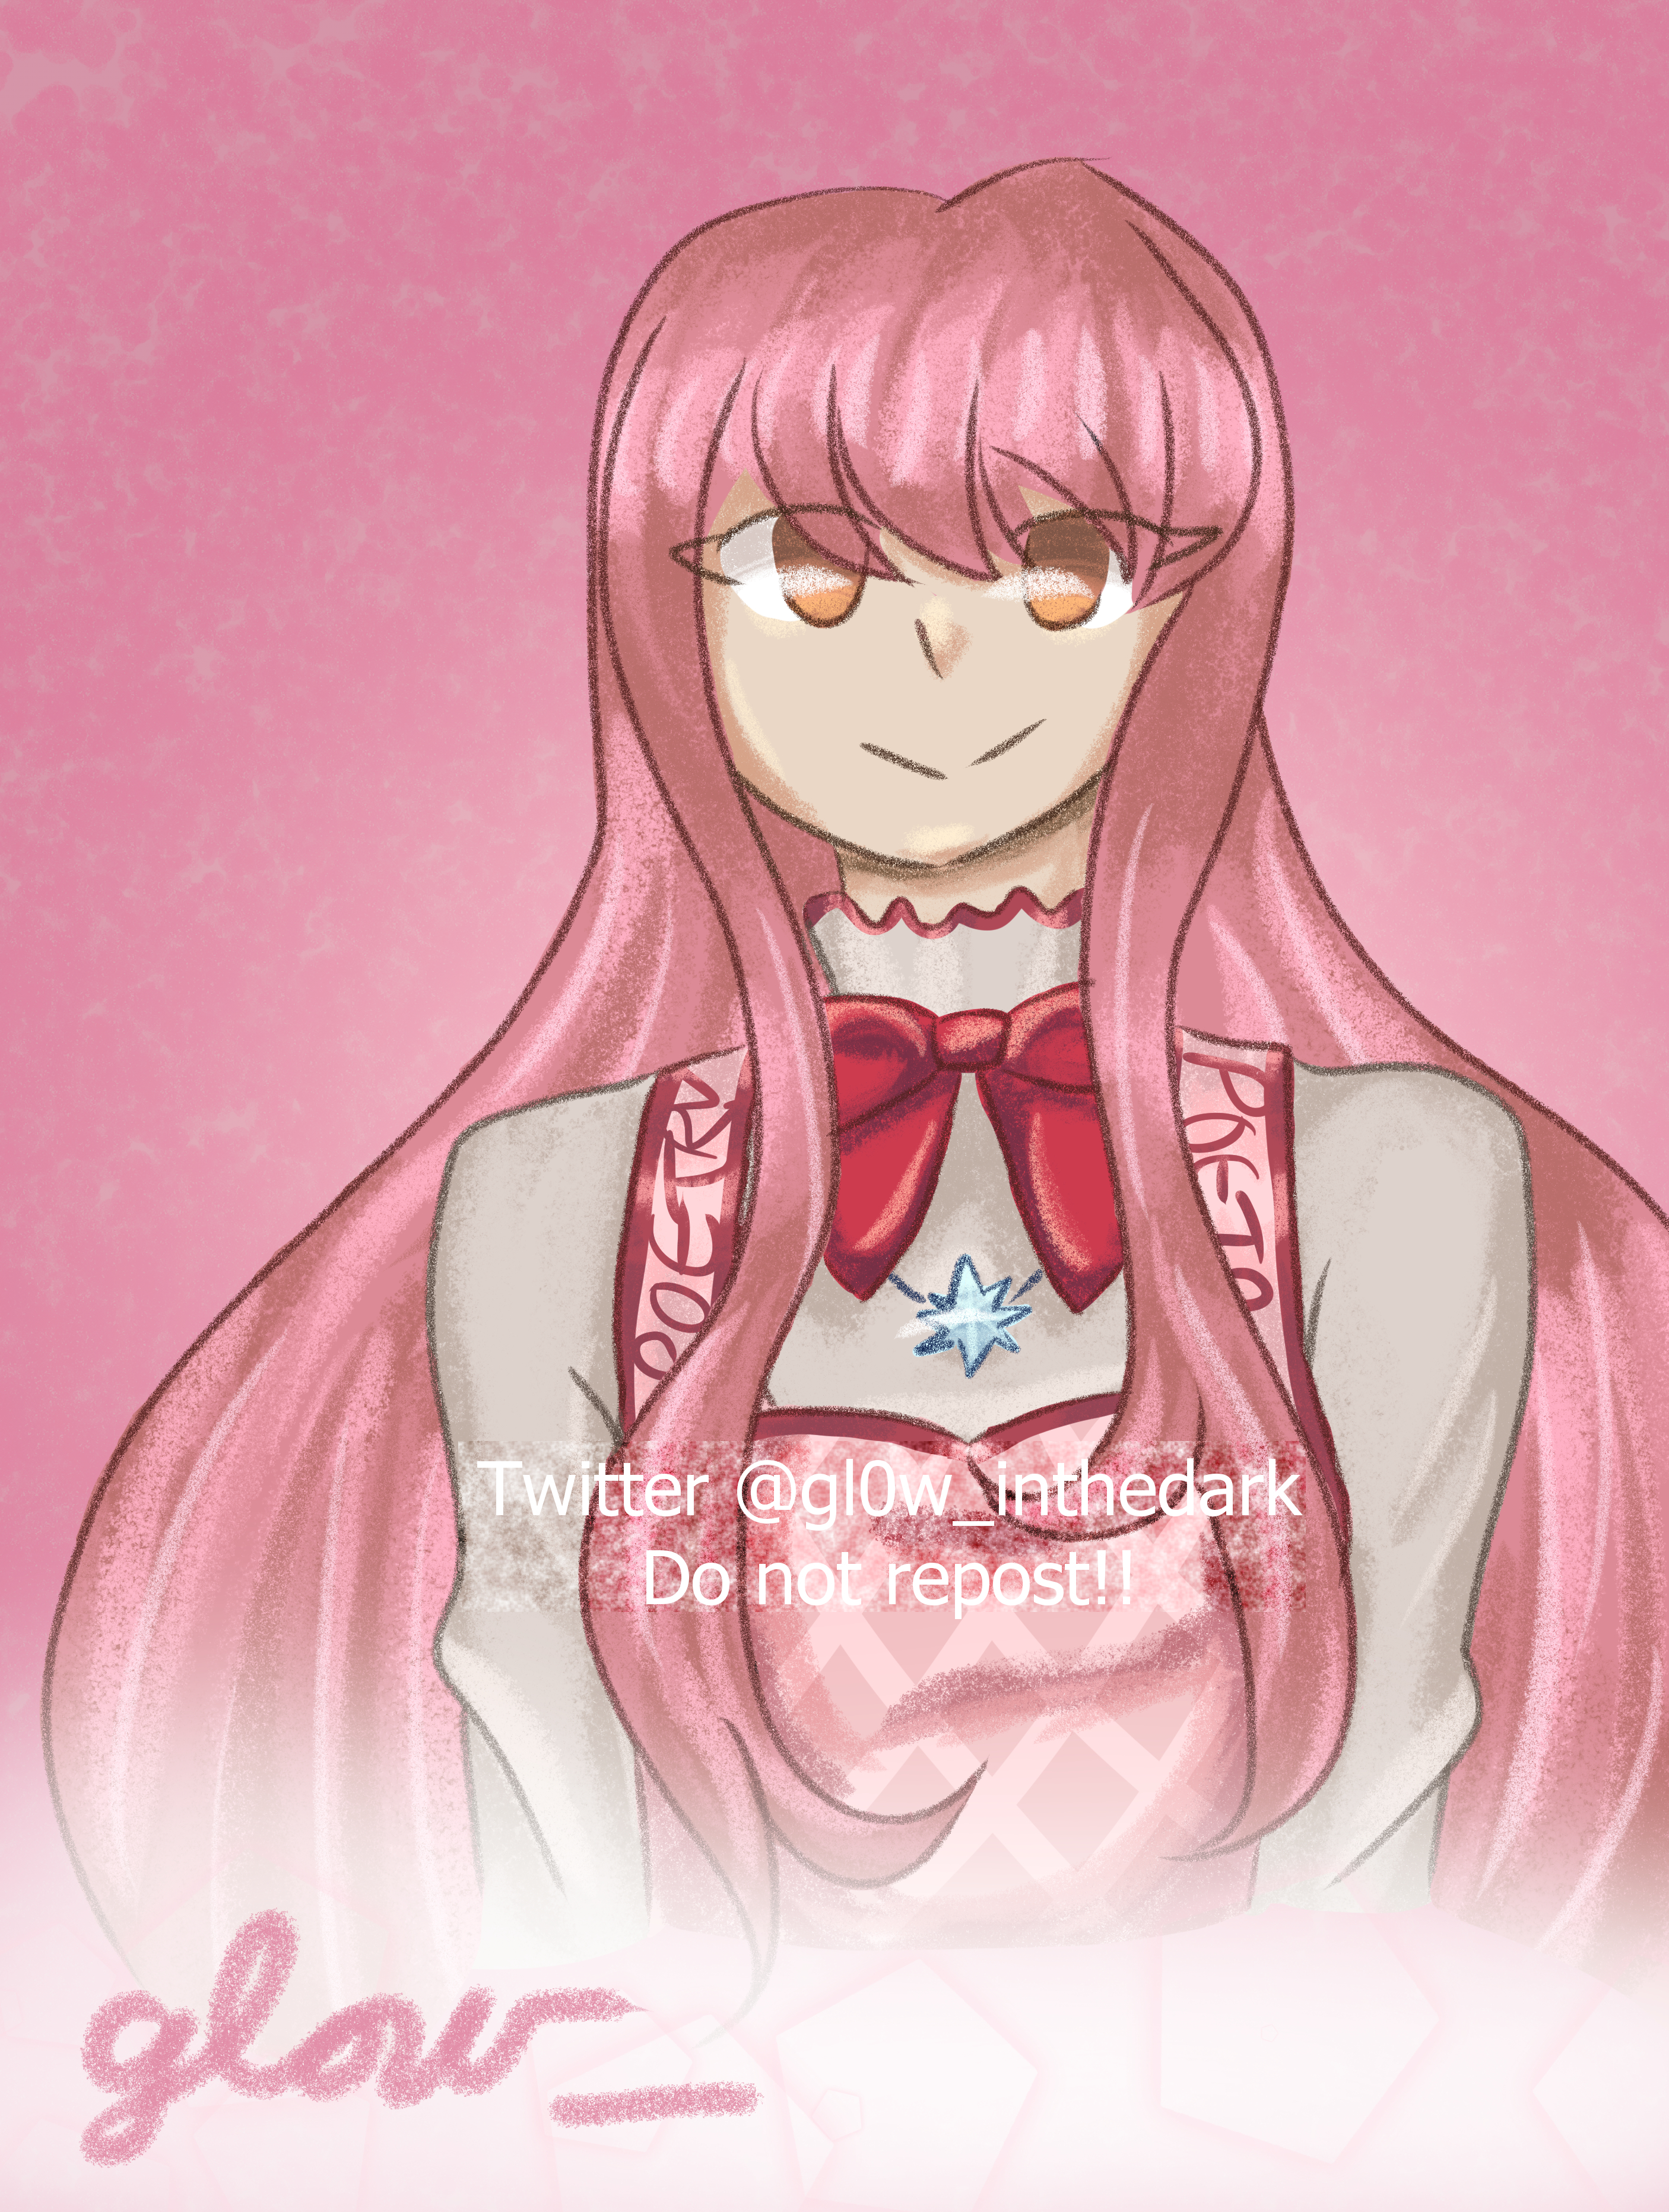 Digital painting of Nikki, a girl with long pink hair in a pink dress, from Shining Nikki.